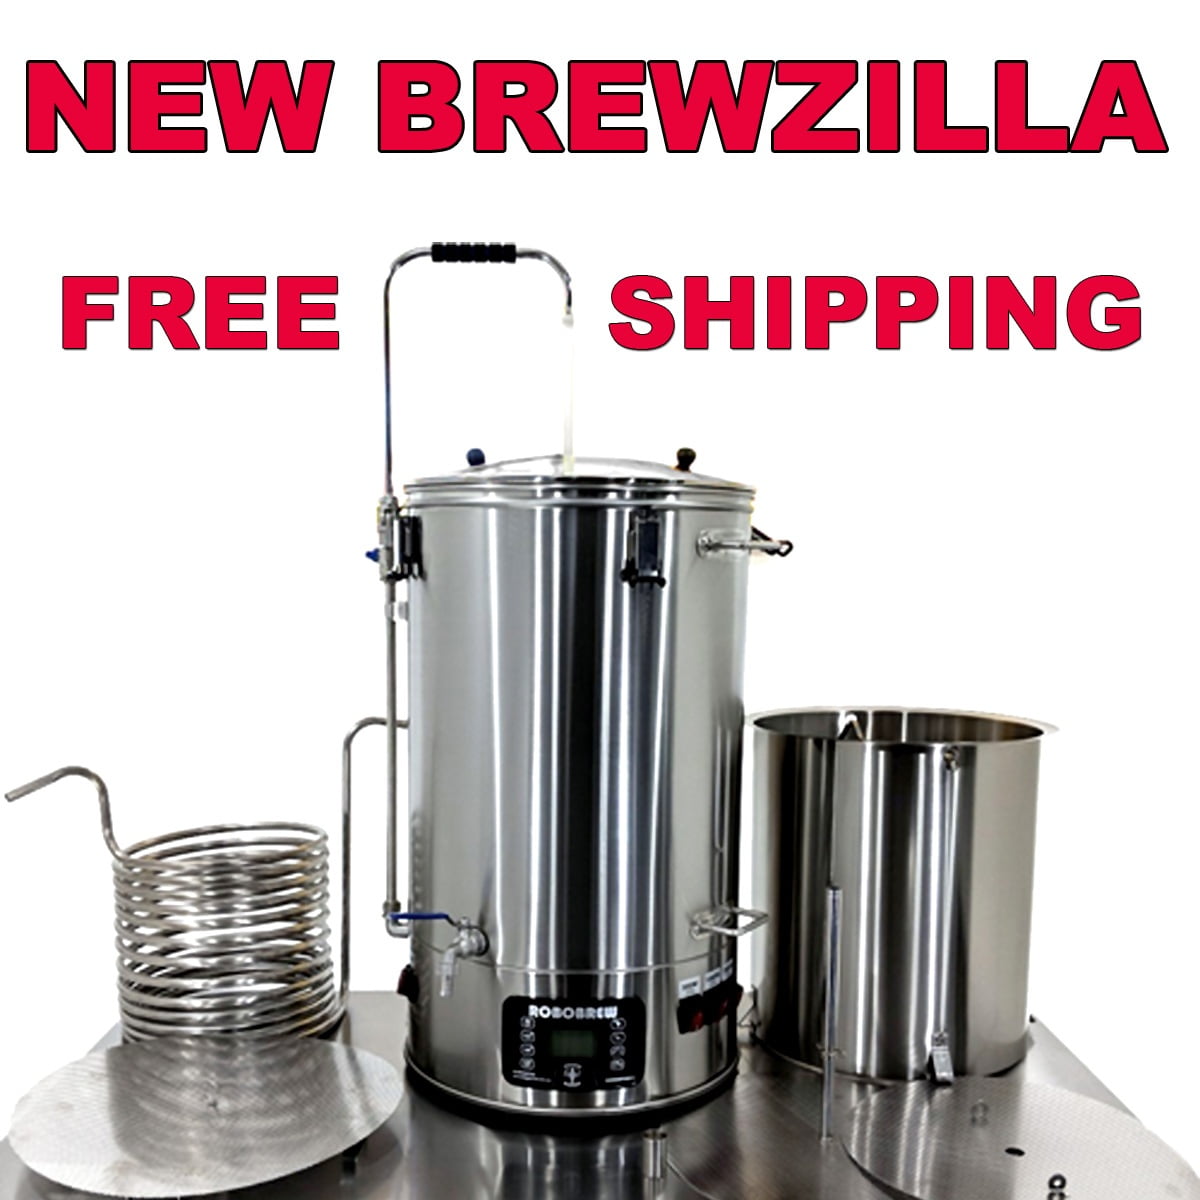 Get Free Shipping on the new high capacity Brew Zilla Electric Home Brewery